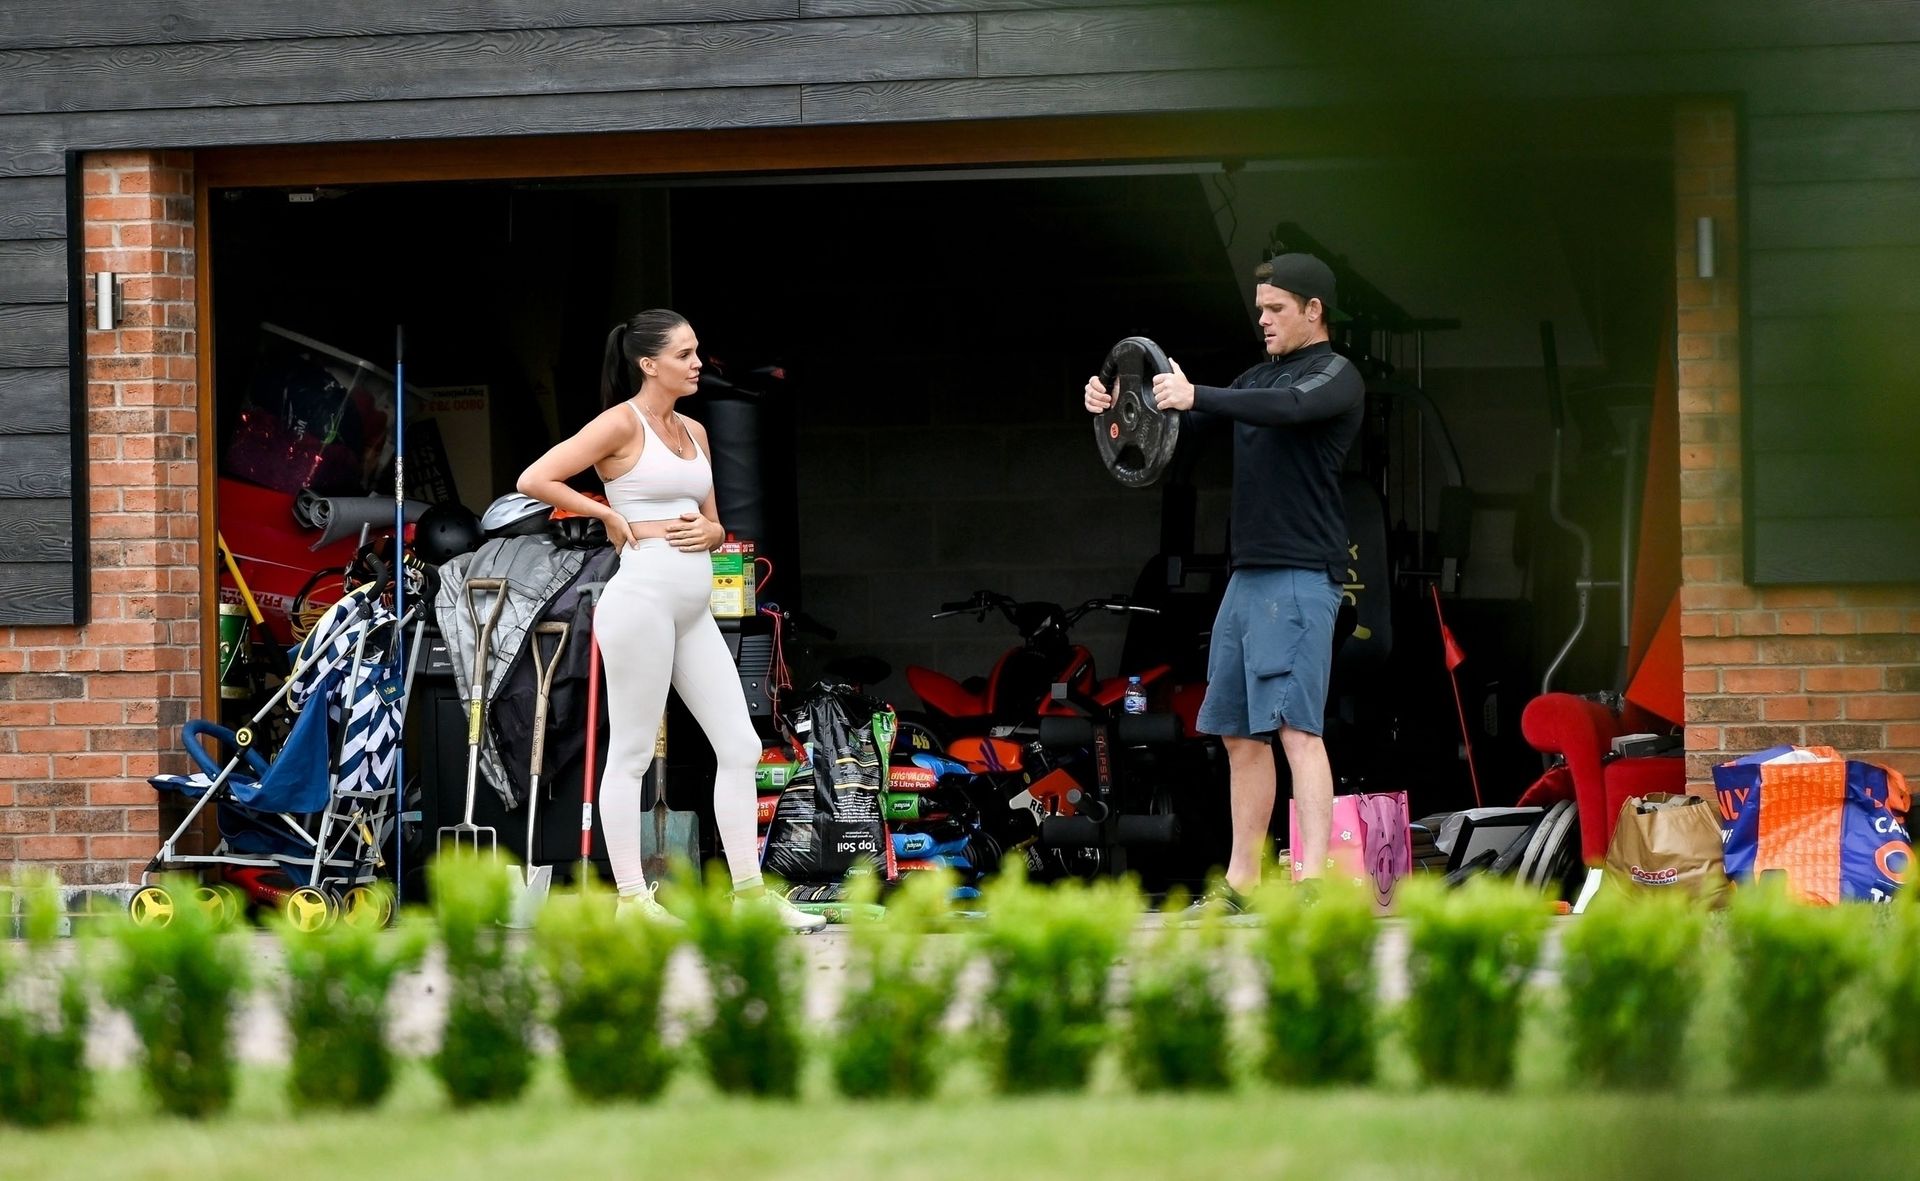 Sexy Danielle Lloyd Is Pictured While Training with Michael ONeill (46 Photos)